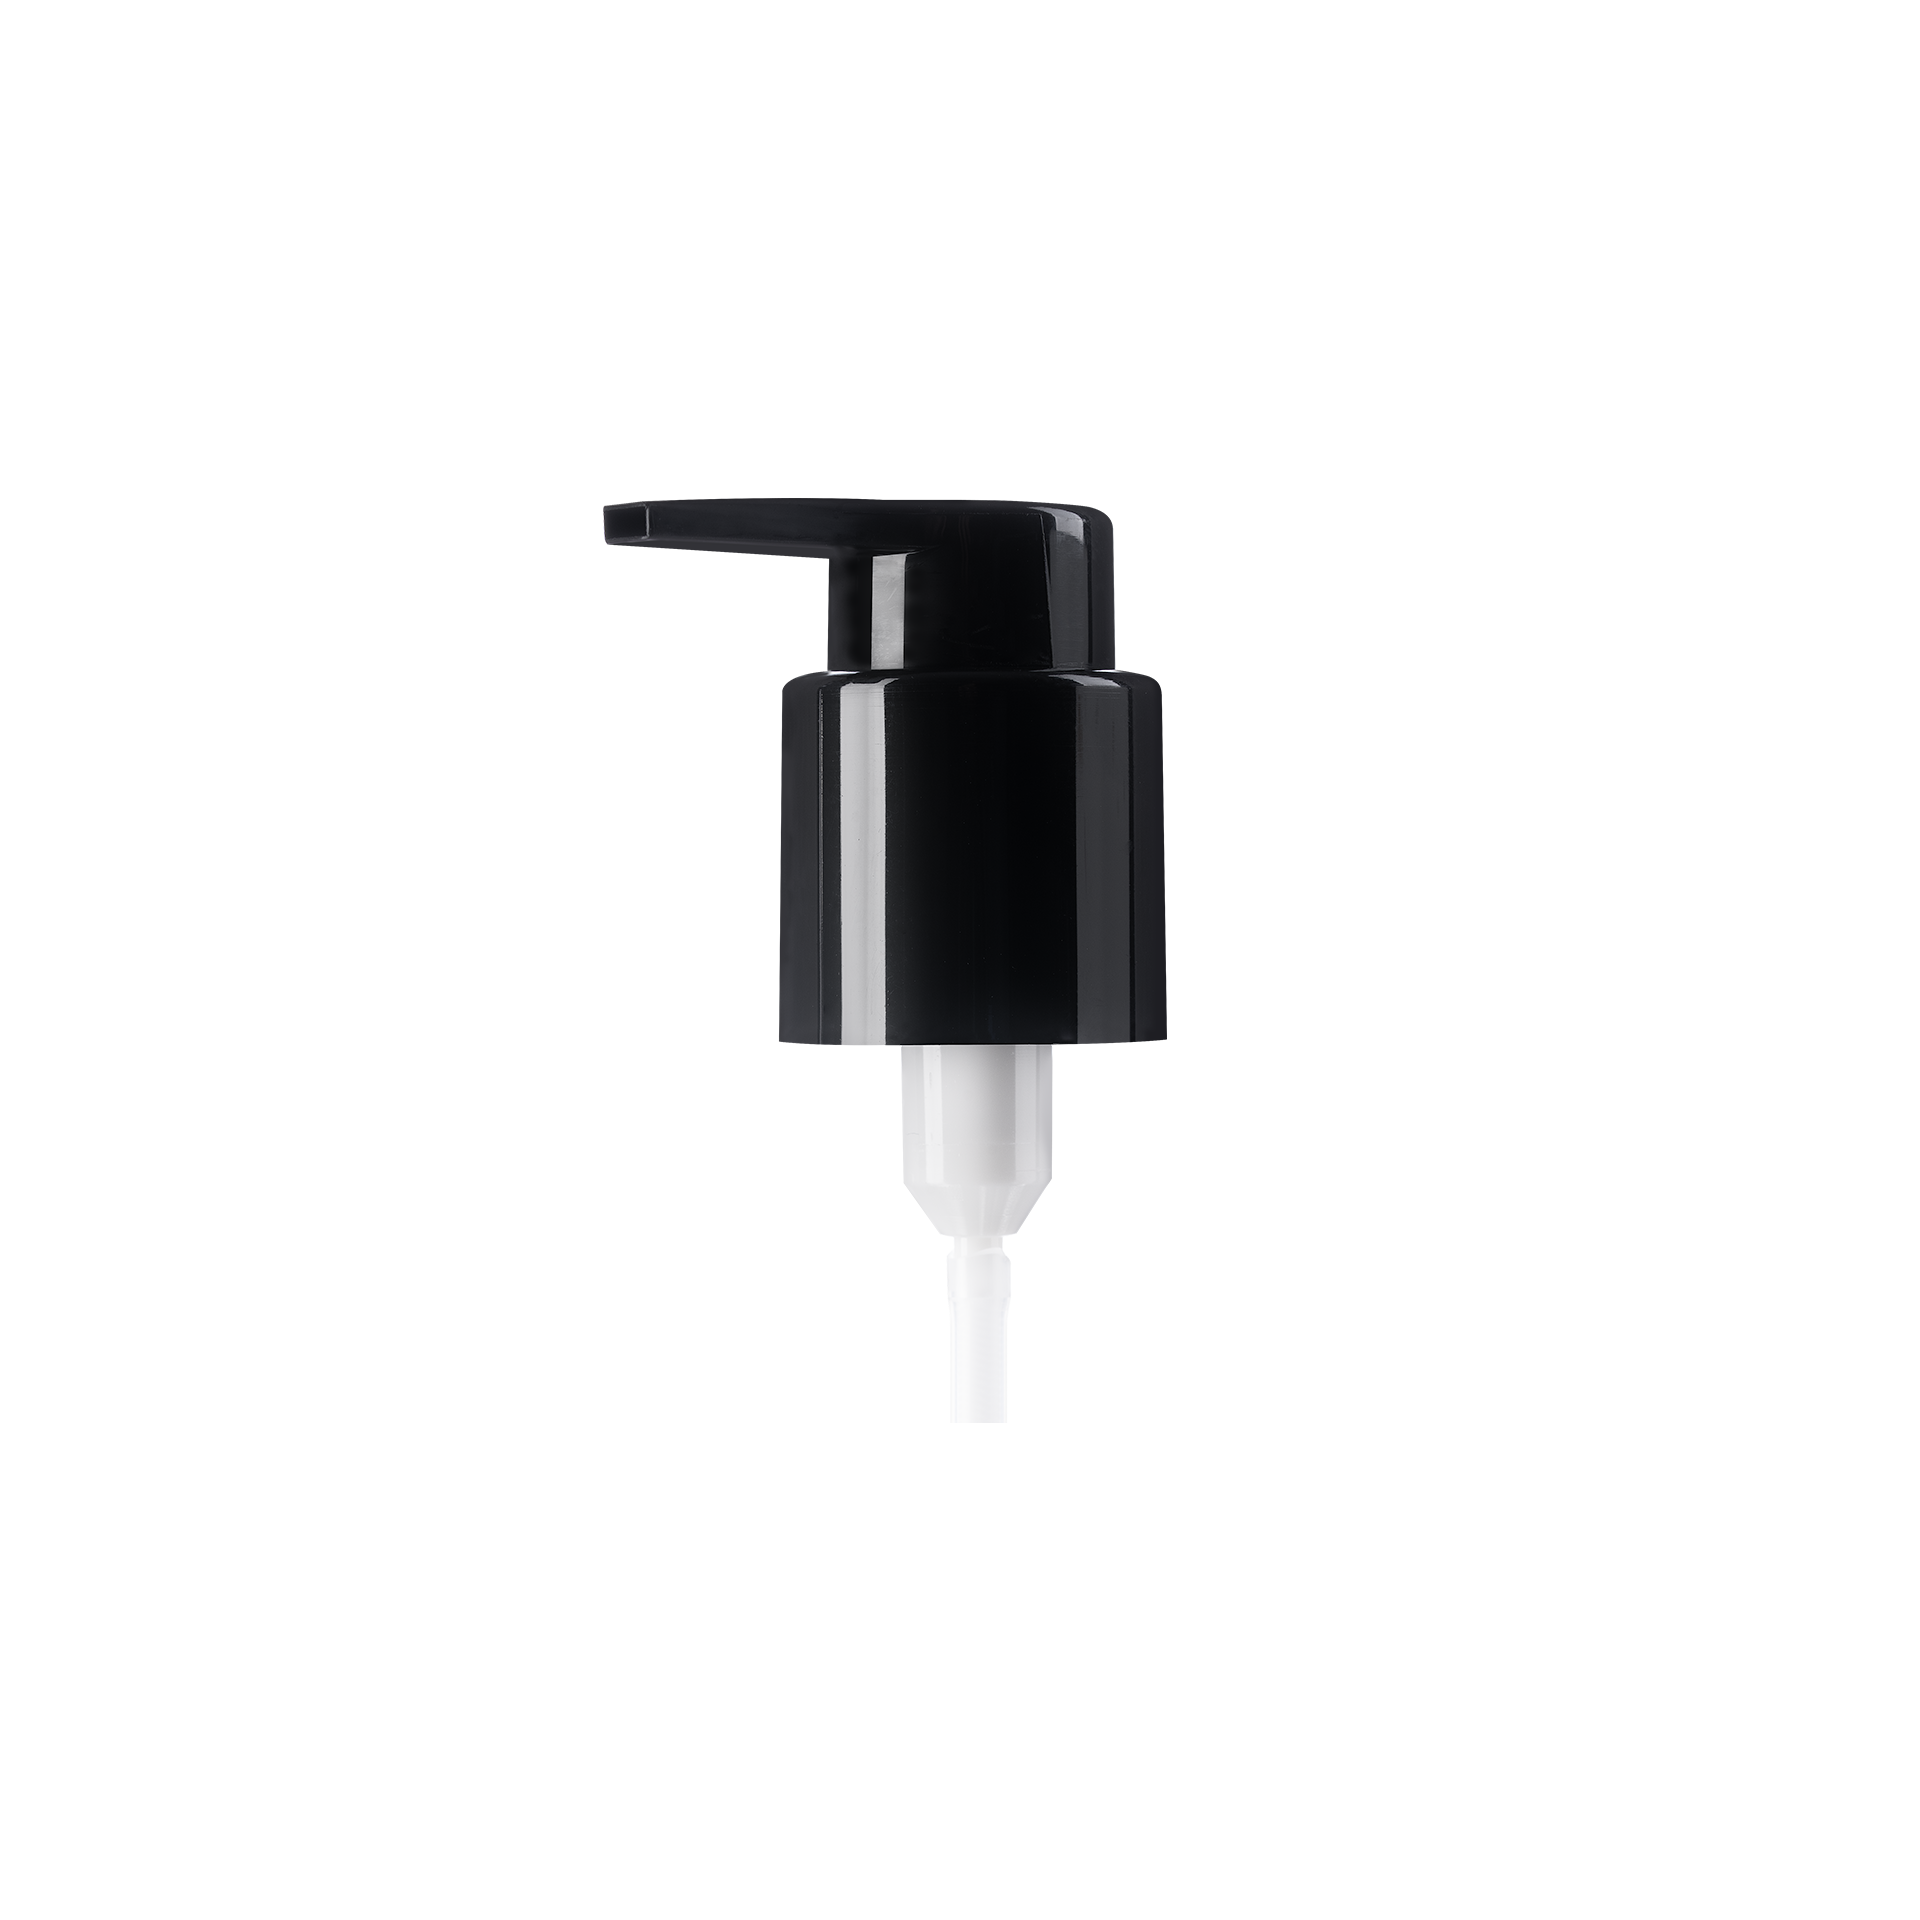 Lotion pump Extended Nozzle 24/410, PP, black, smooth, dose 0.50ml, security clip (Linden 118)